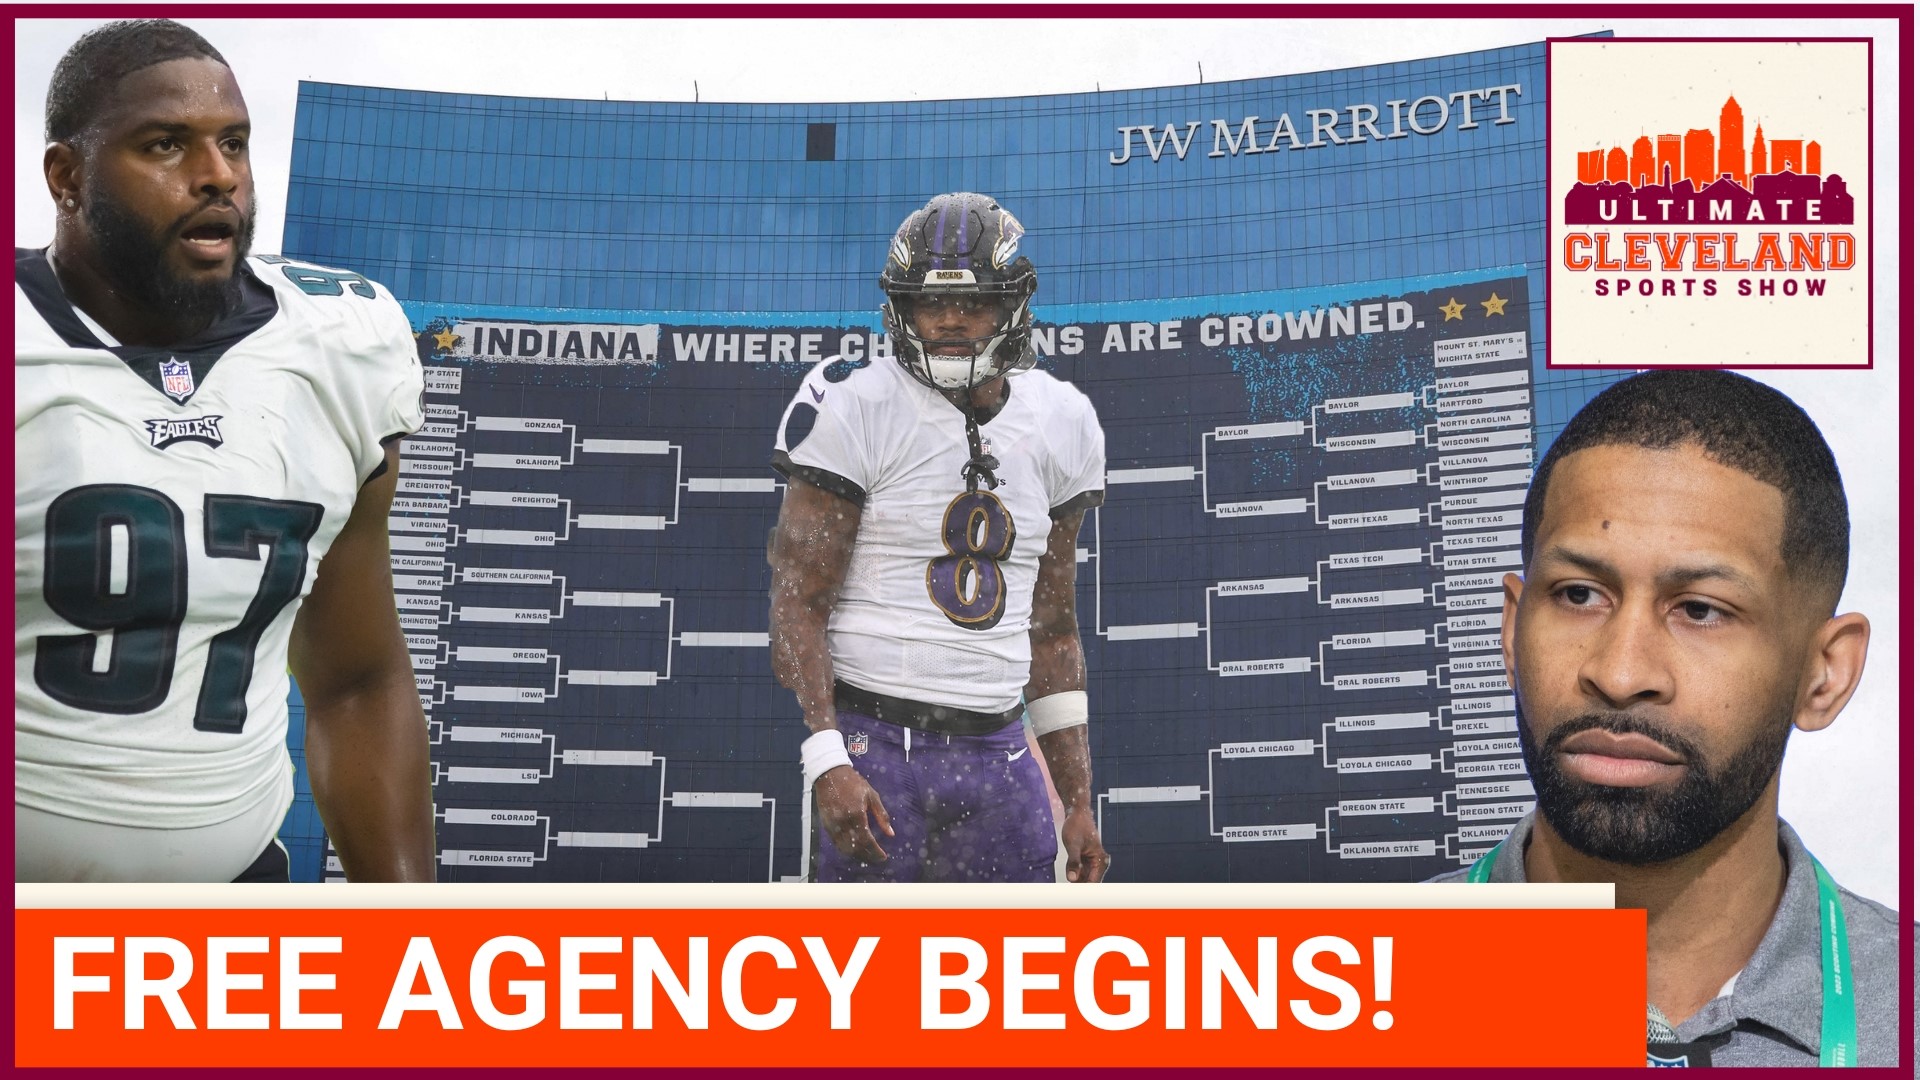 NFL Free Agency begins at 12 pm ET while we're on the air & the panel will react to the latest breaking news of signings & trades for the last hour of the show.